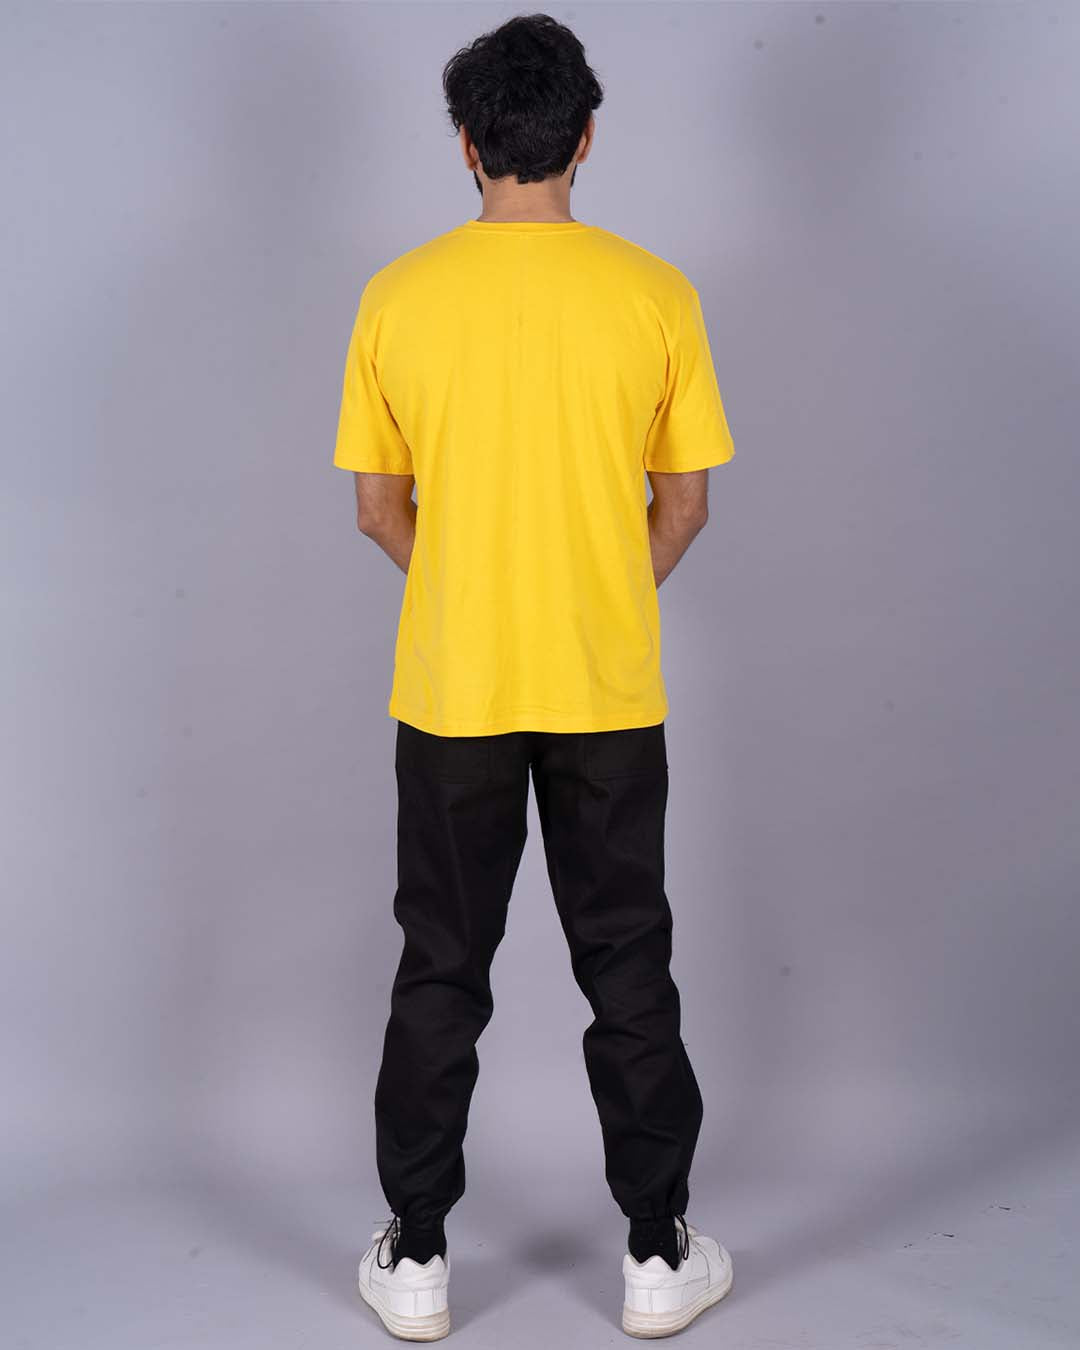 Men's Travis Trippy Oversized Co-Ord Set - Yellow and Black